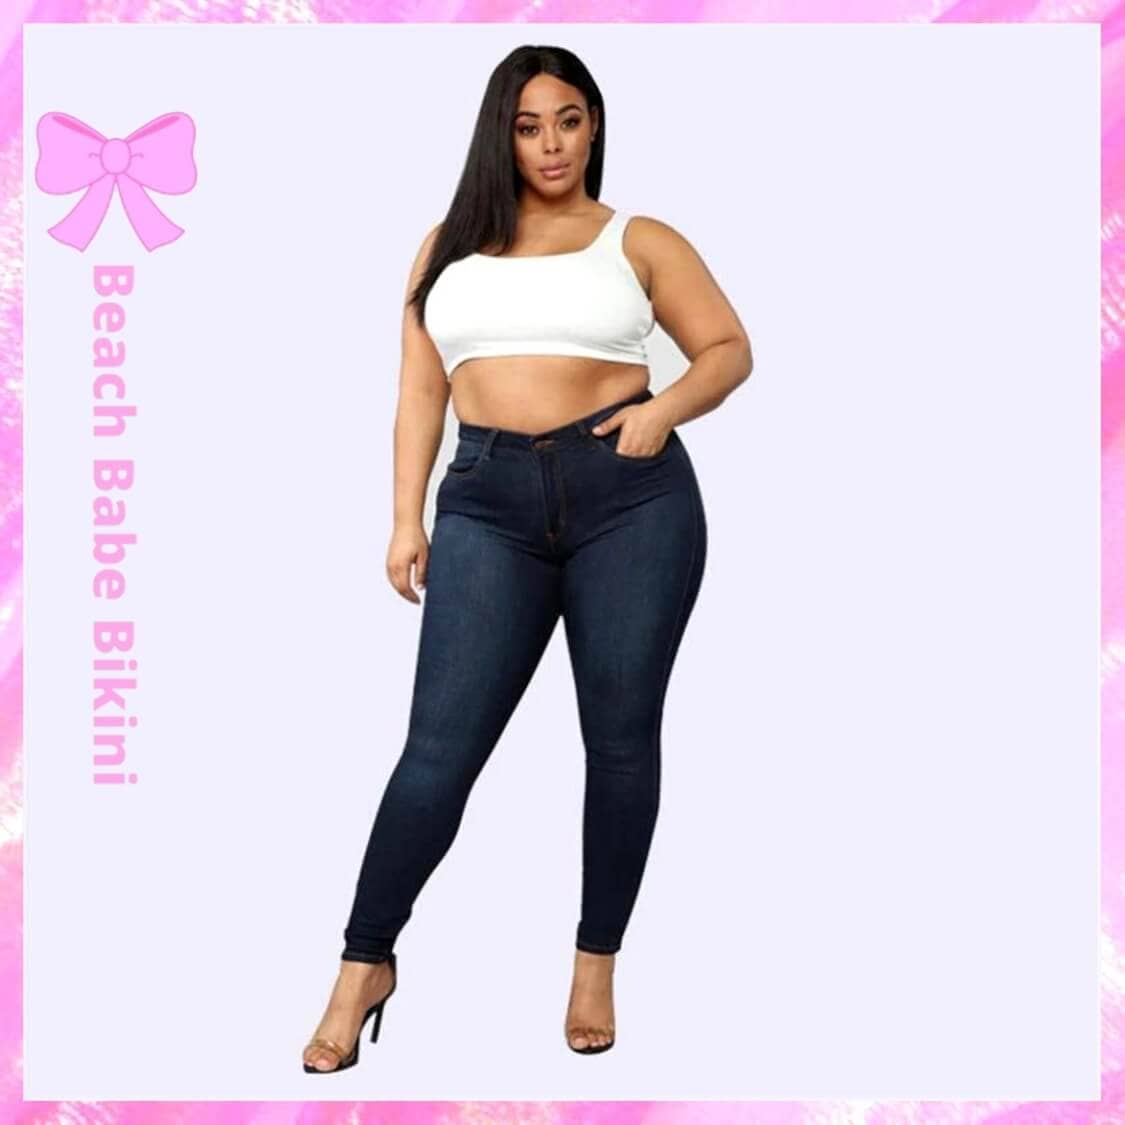 Plus Size High Waisted Skinny Jeans